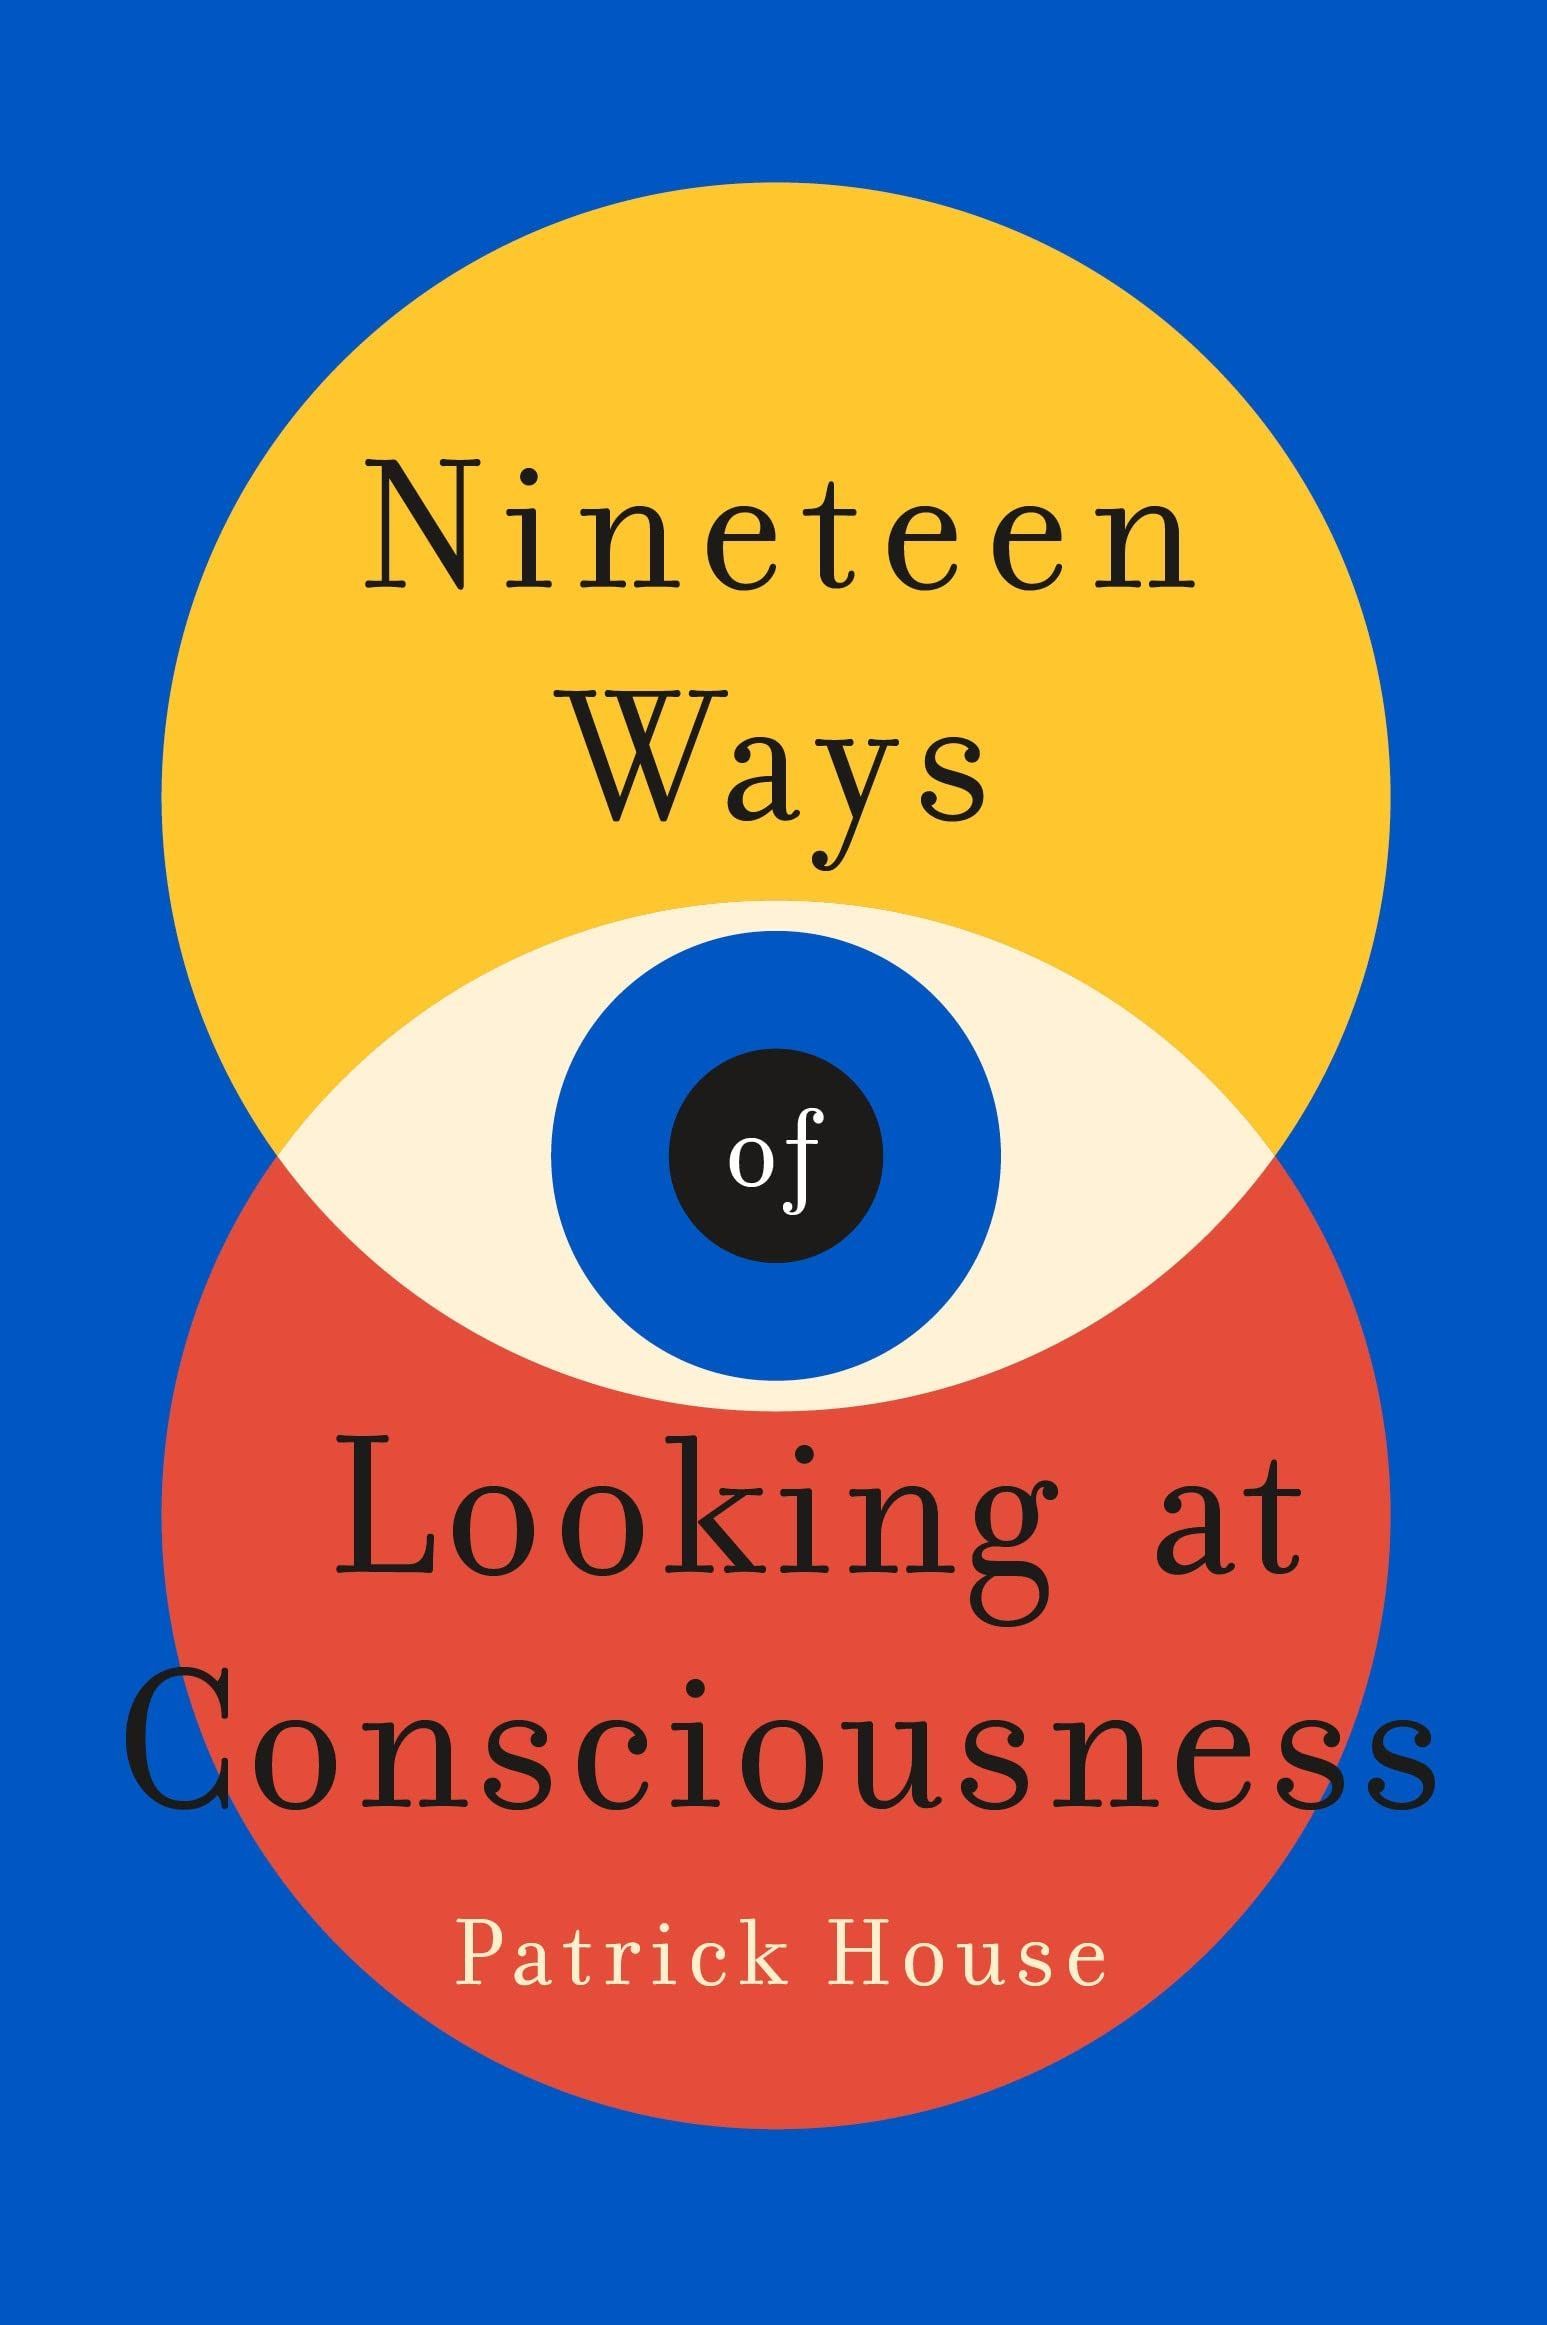 What Is It Like to Have a Brain?: On Patrick House’s “Nineteen Ways of Looking at Consciousness”